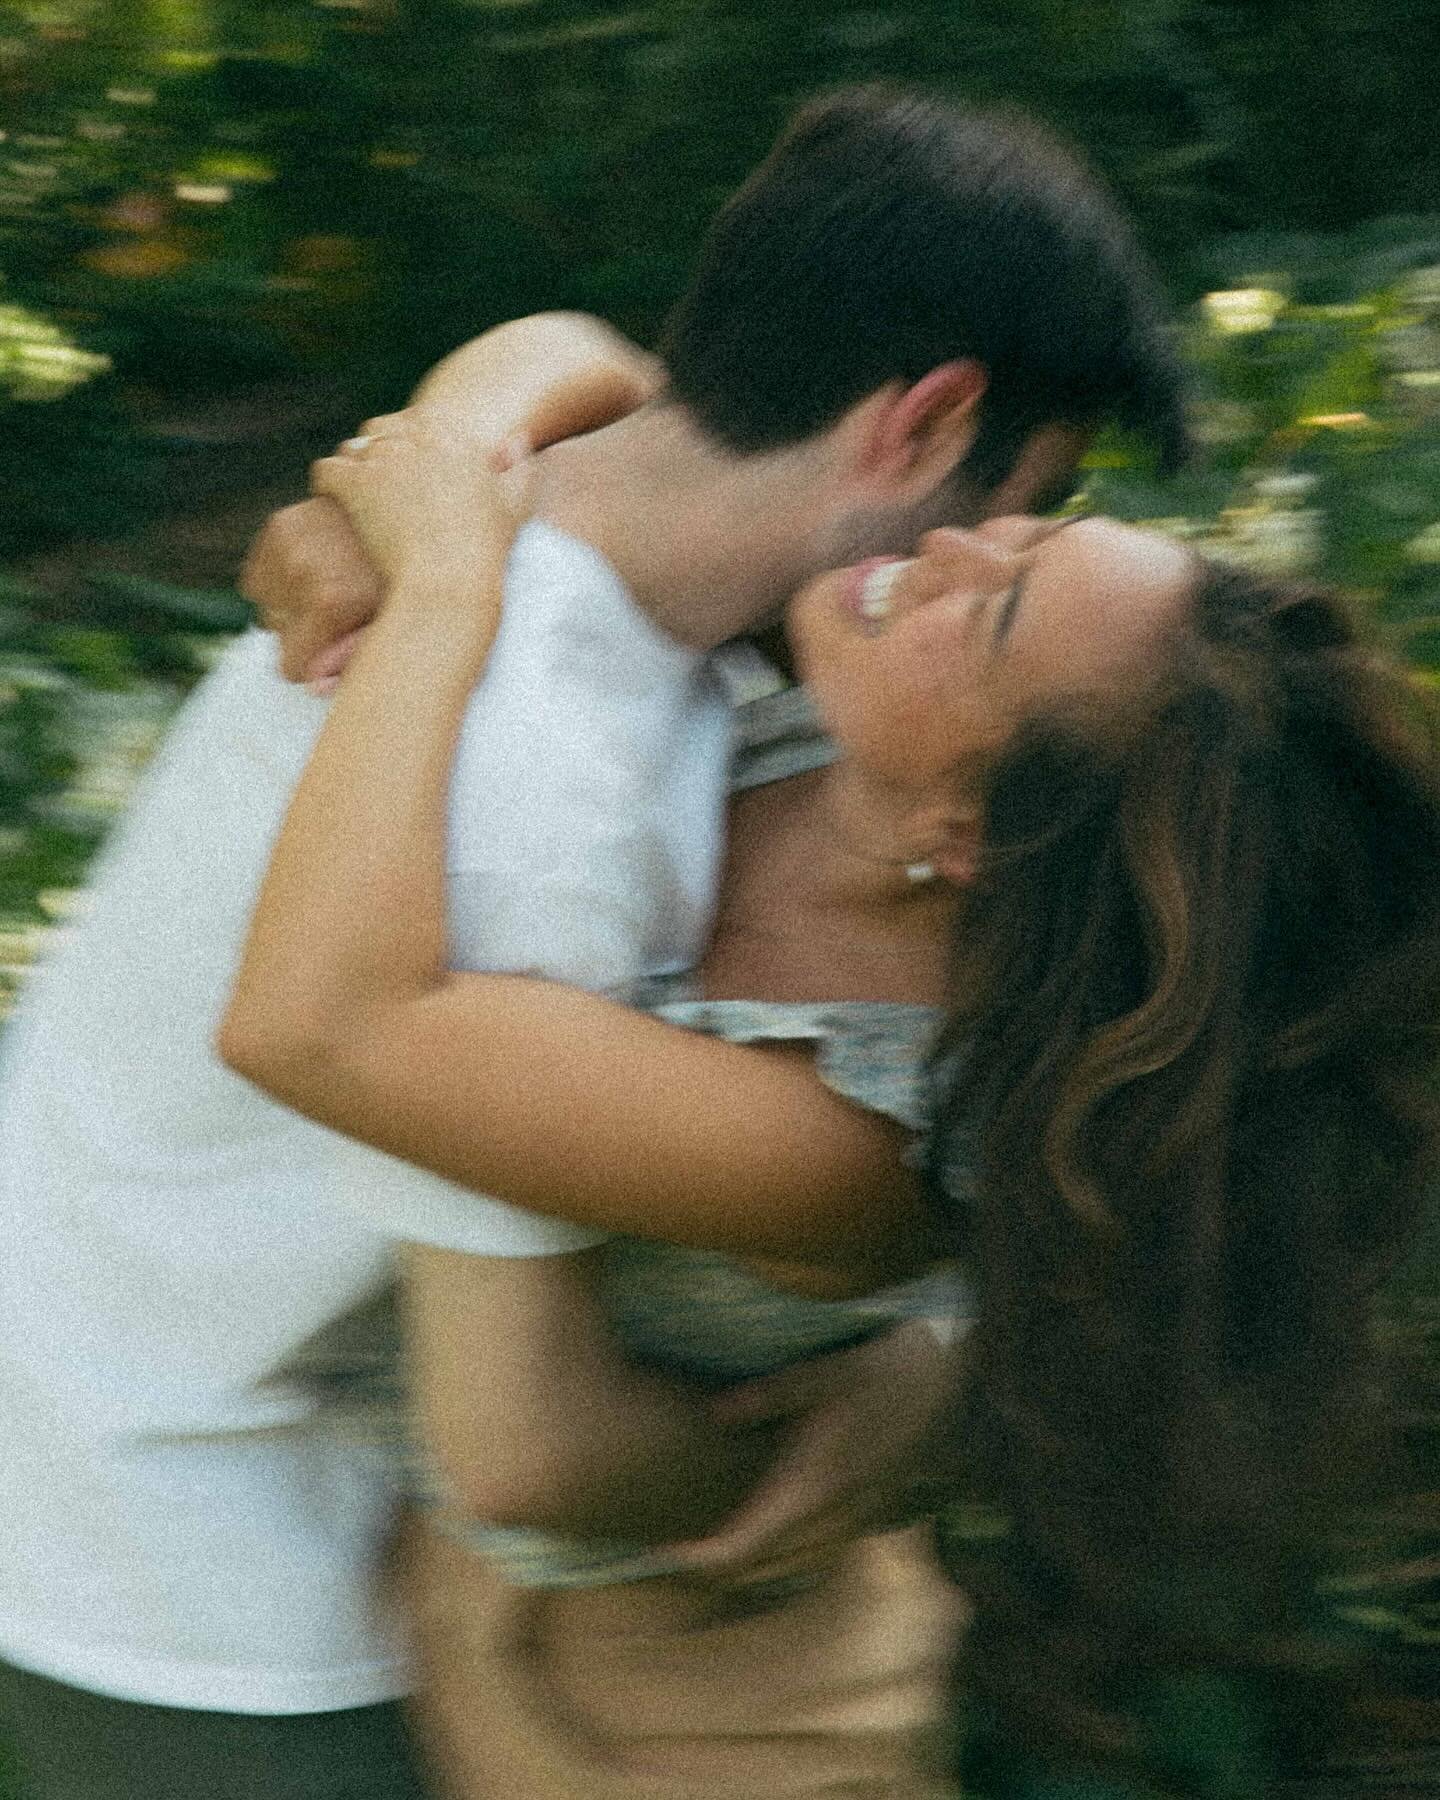 sweetest engagement session with alexa + joseph! so excited to celebrate with these two next spring!